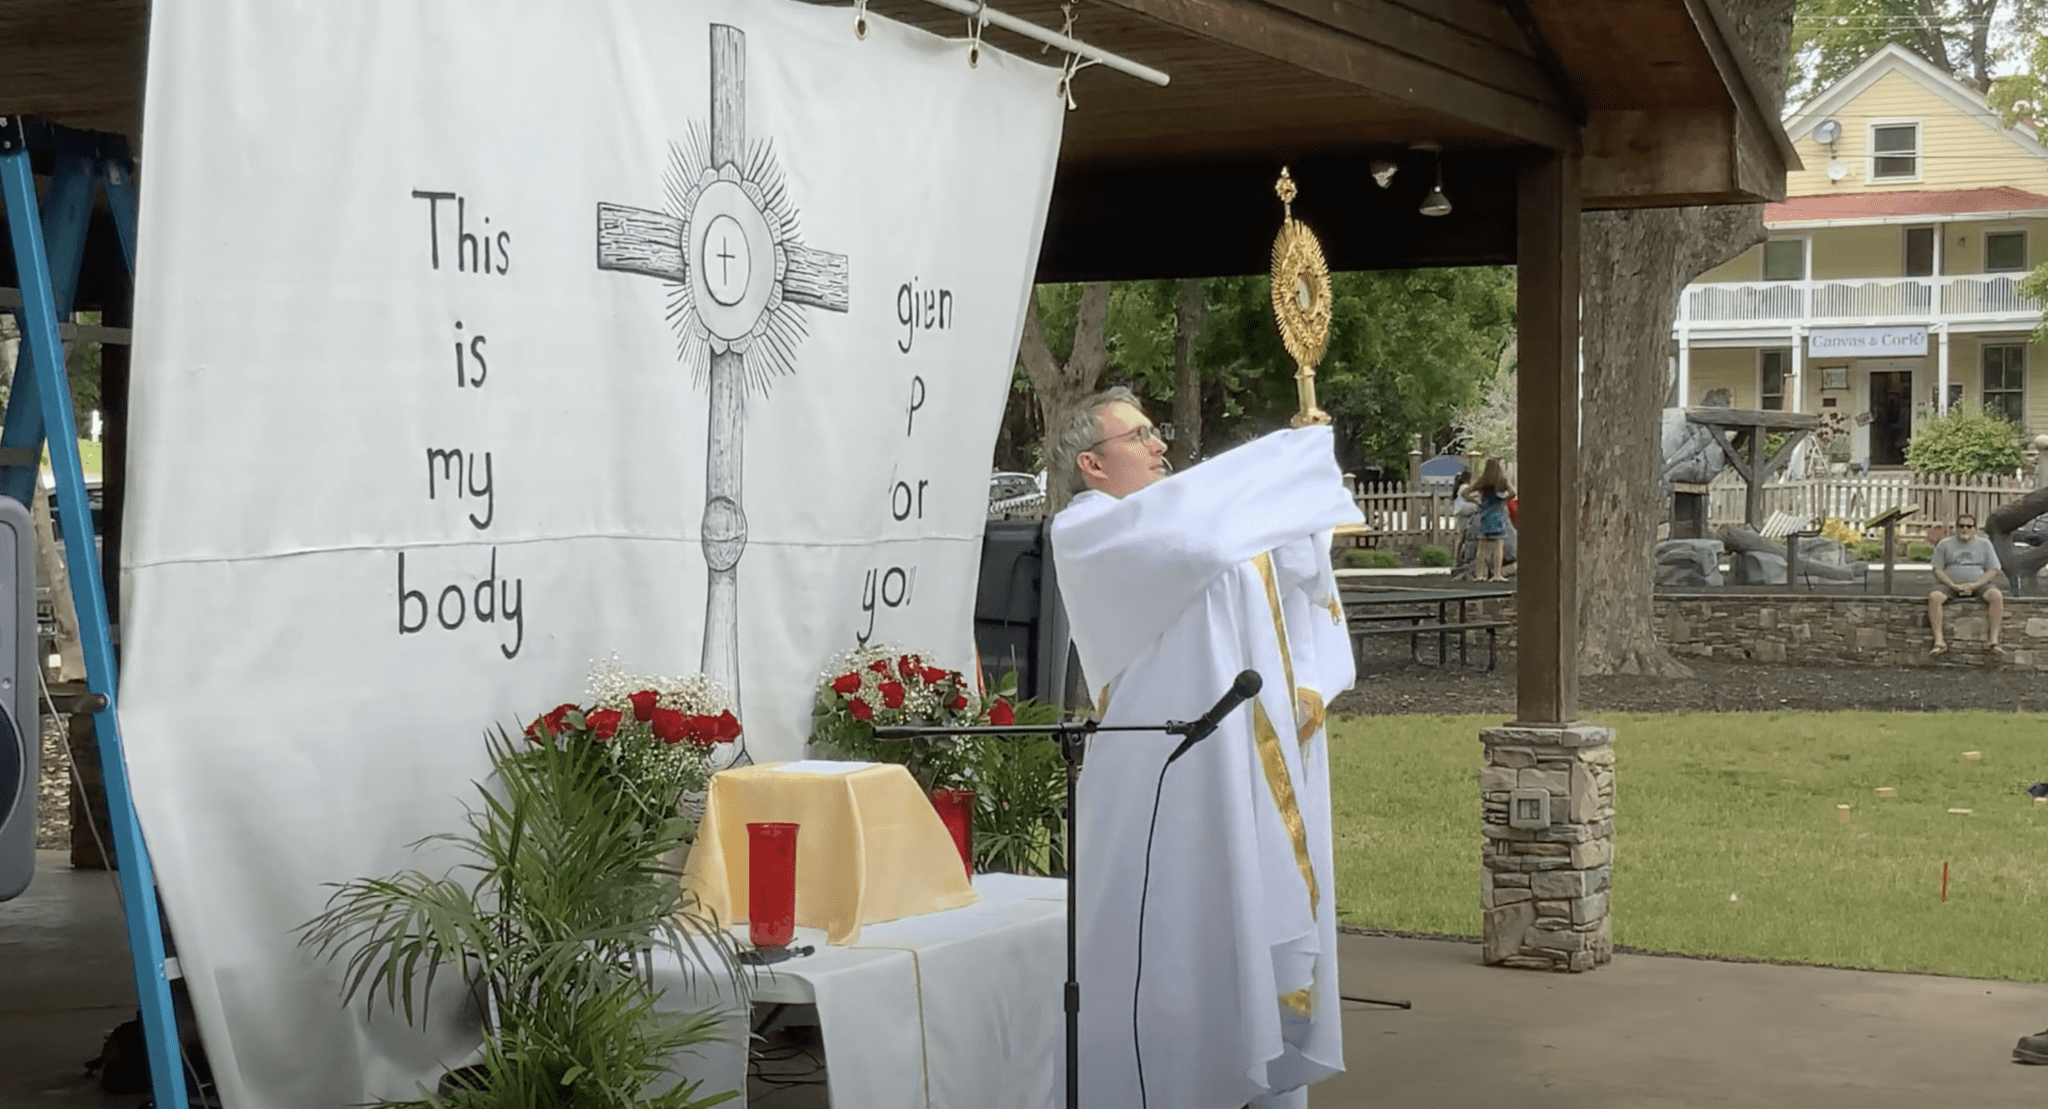 Father Matthew Dalrymple, parish administrator at St. Luke Church, Dahlonega, blesses the congregation with the Eucharist in the monstrance.